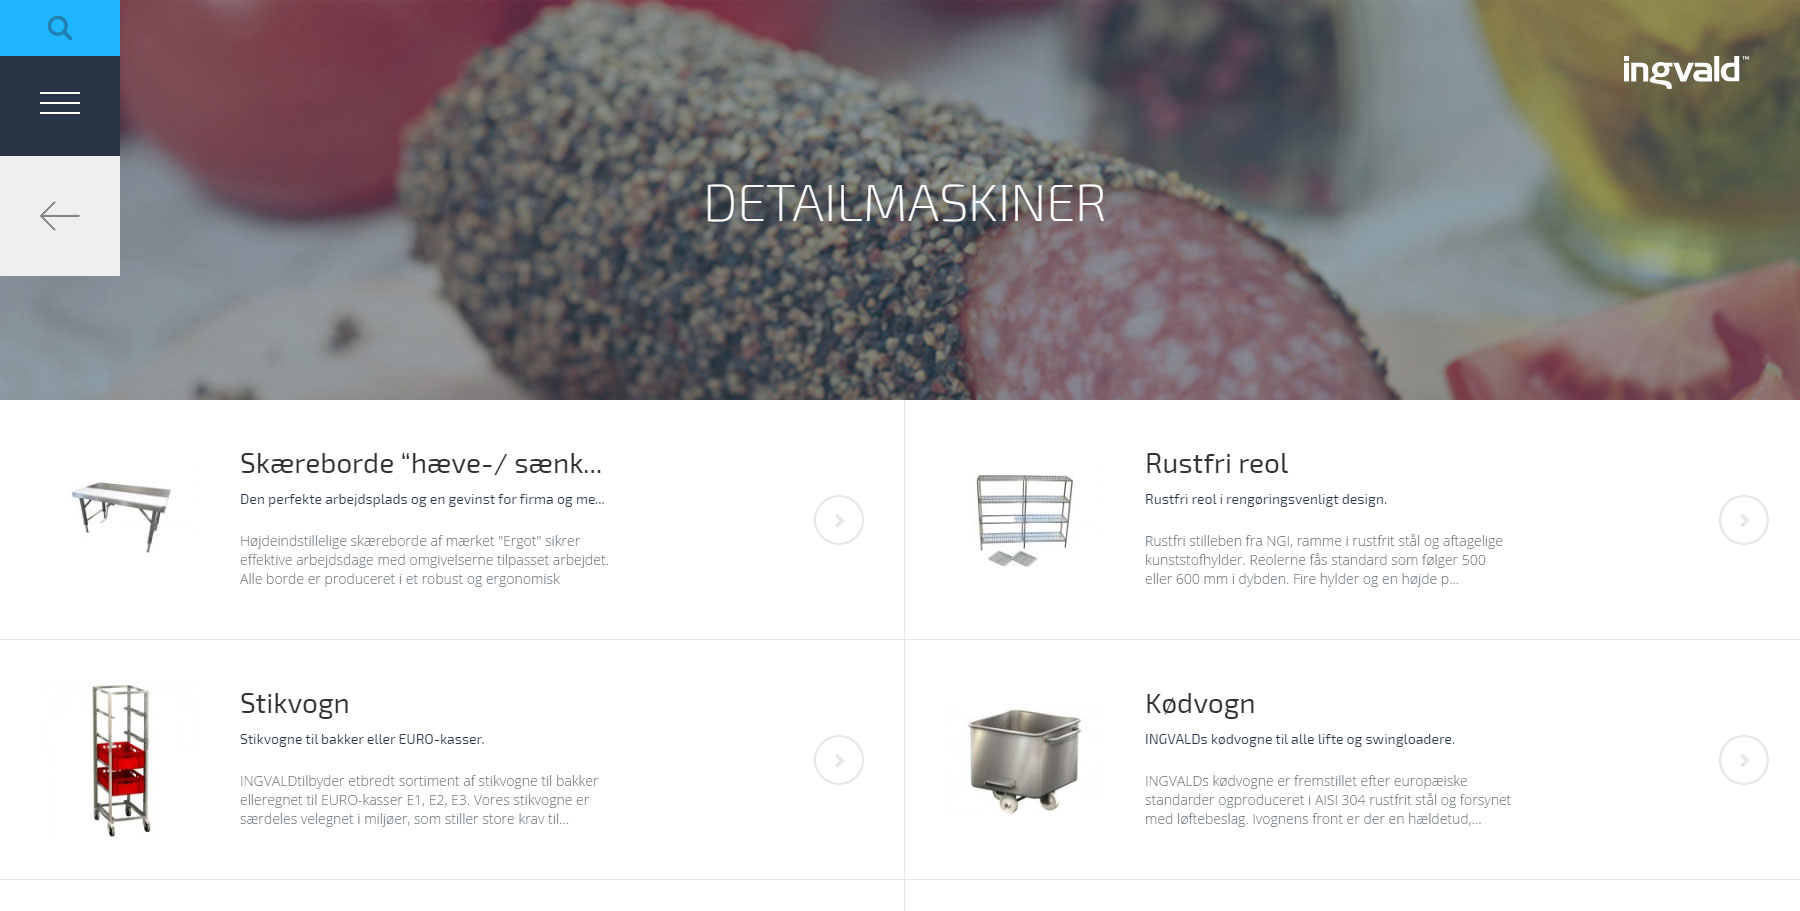 ingvald.dk - Website of the Day